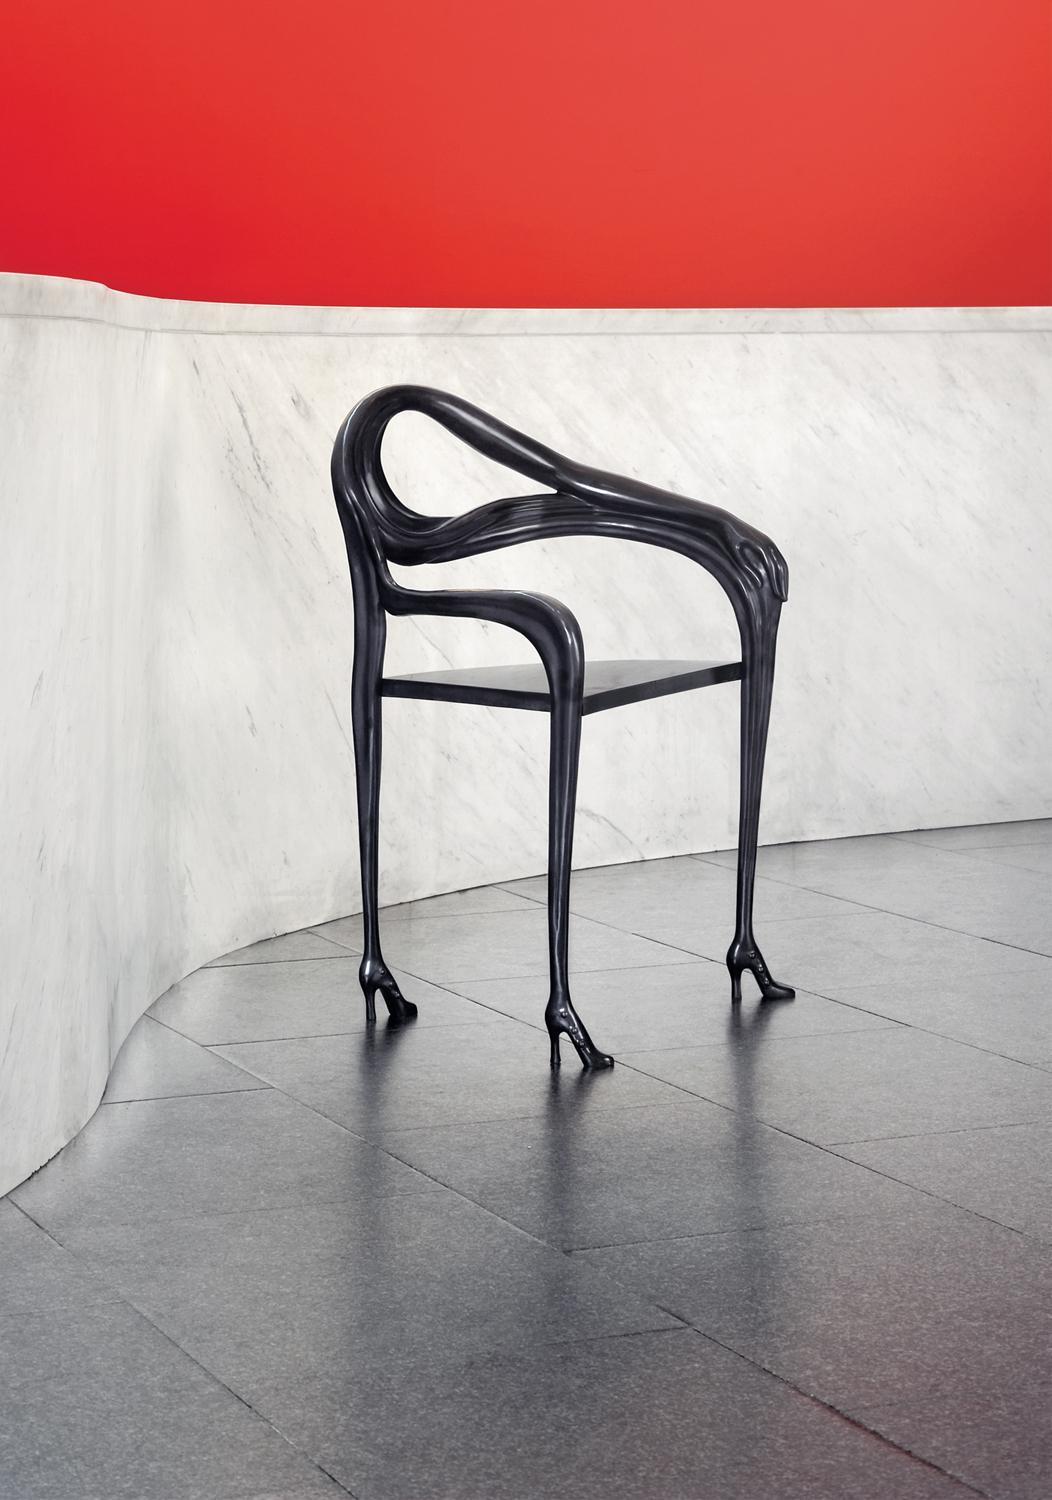 Leda Blacklabel Armchair, Limited Edition, Salvador Dalí
Limited to 105 pieces
Design inspired on an artwork by Salvador Dalí
Dimensions: 47 x 60 x 92 H cm
Materials: Structure in cast polished brass.

Design inspired on an artwork by Salvador Dalí: